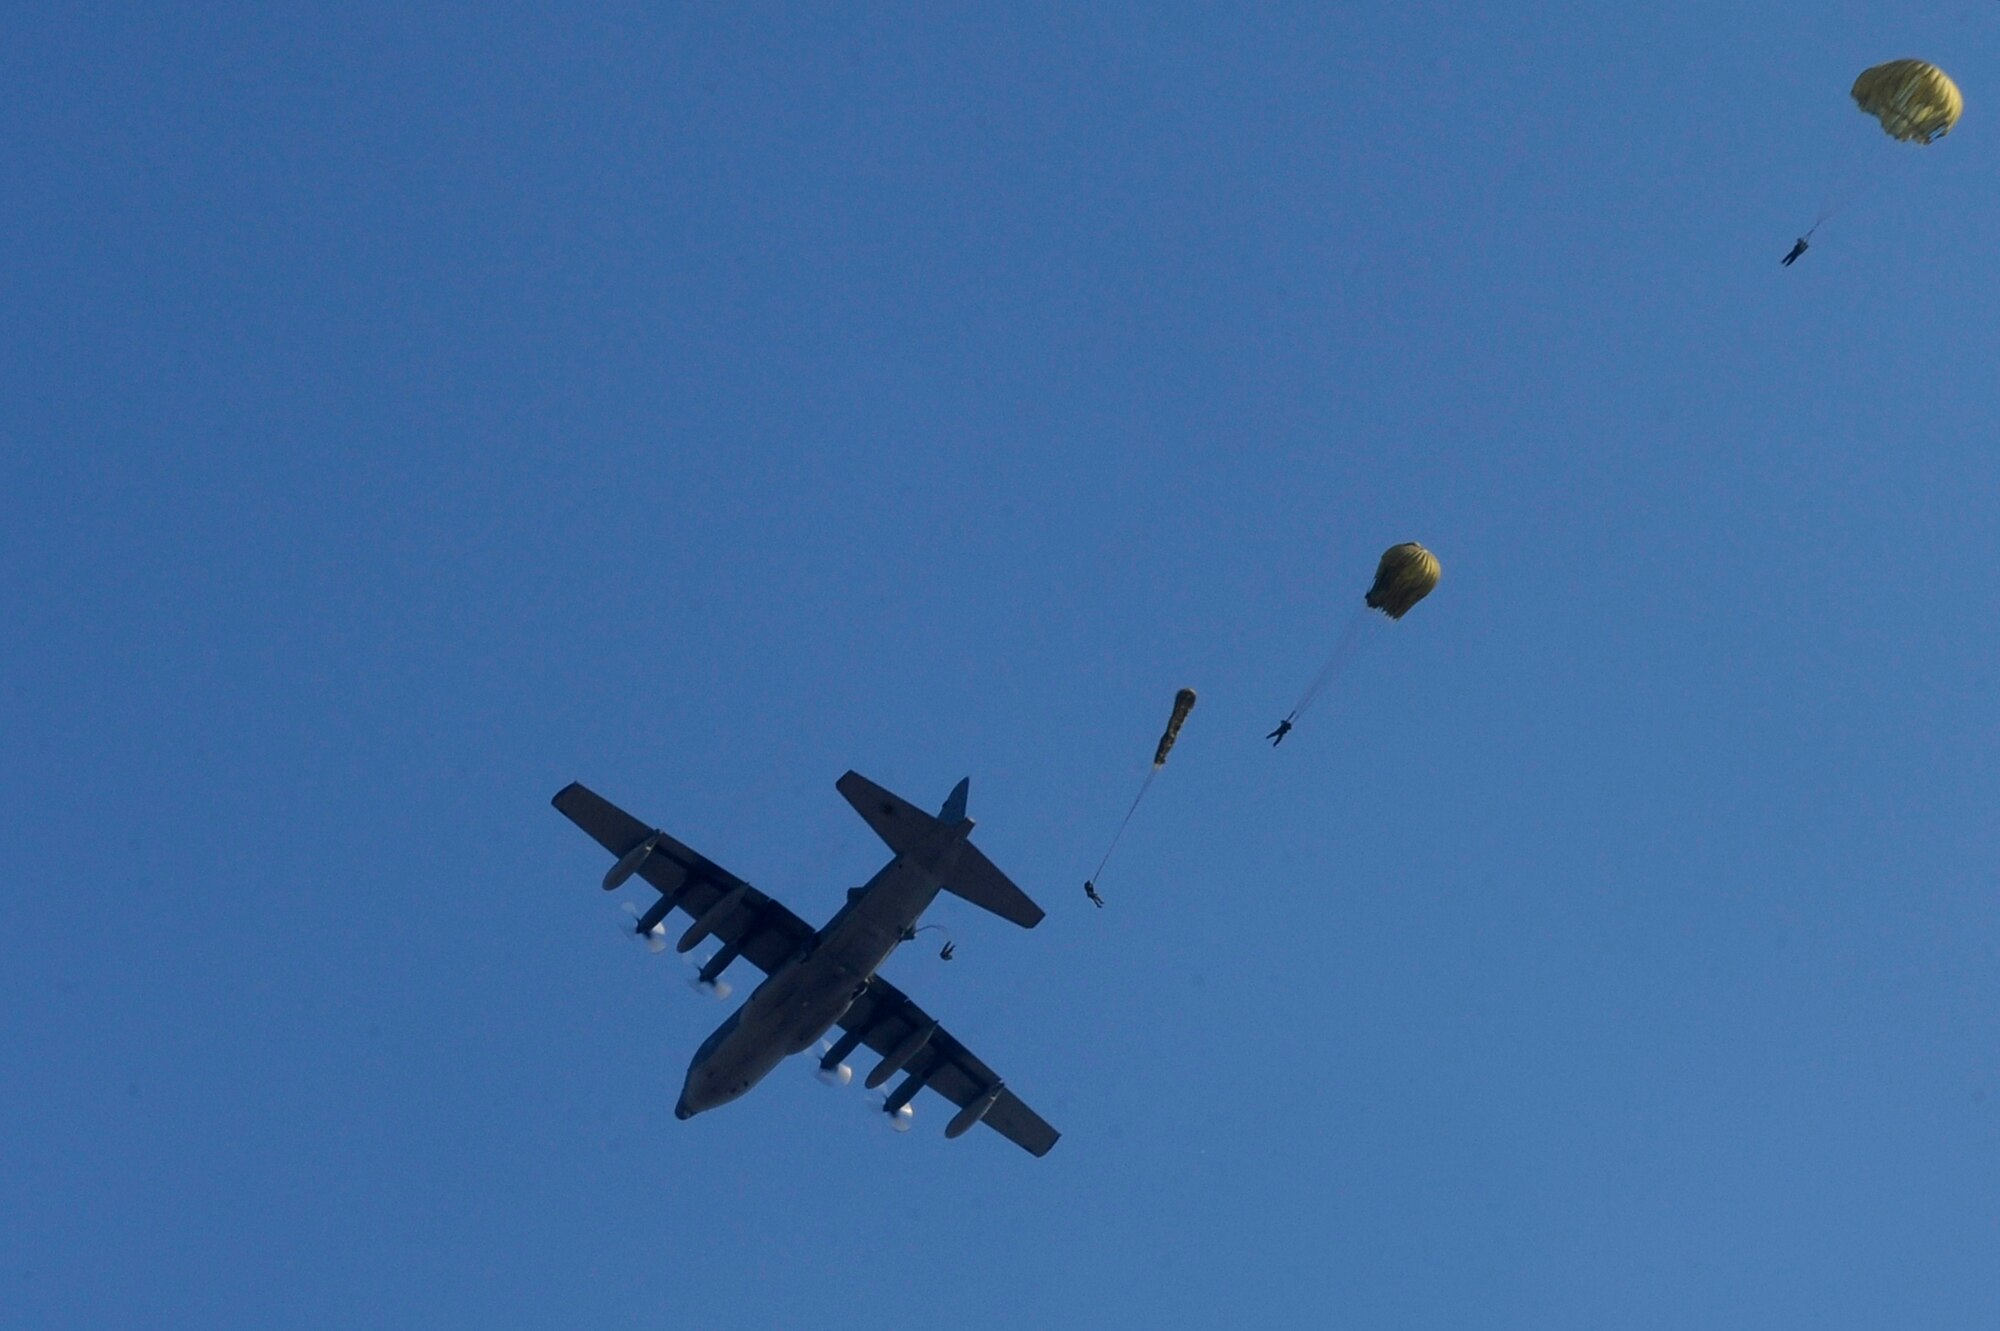 Soldiers from the Republic of Korea army 7th Special Forces Brigade, 35th Special Forces Battalion parachute out of a MC-130P Combat Shadow from Kadena Air Base, Japan as part of the annual FOAL Eagle exercise near Iksan, Republic of Korea, April 4, 2013. FOAL Eagle is a joint forces exercise spanning ground, air, naval, expeditionary and special operations. (U.S. Air Force photo by Senior Airman Marcus Morris/Released)